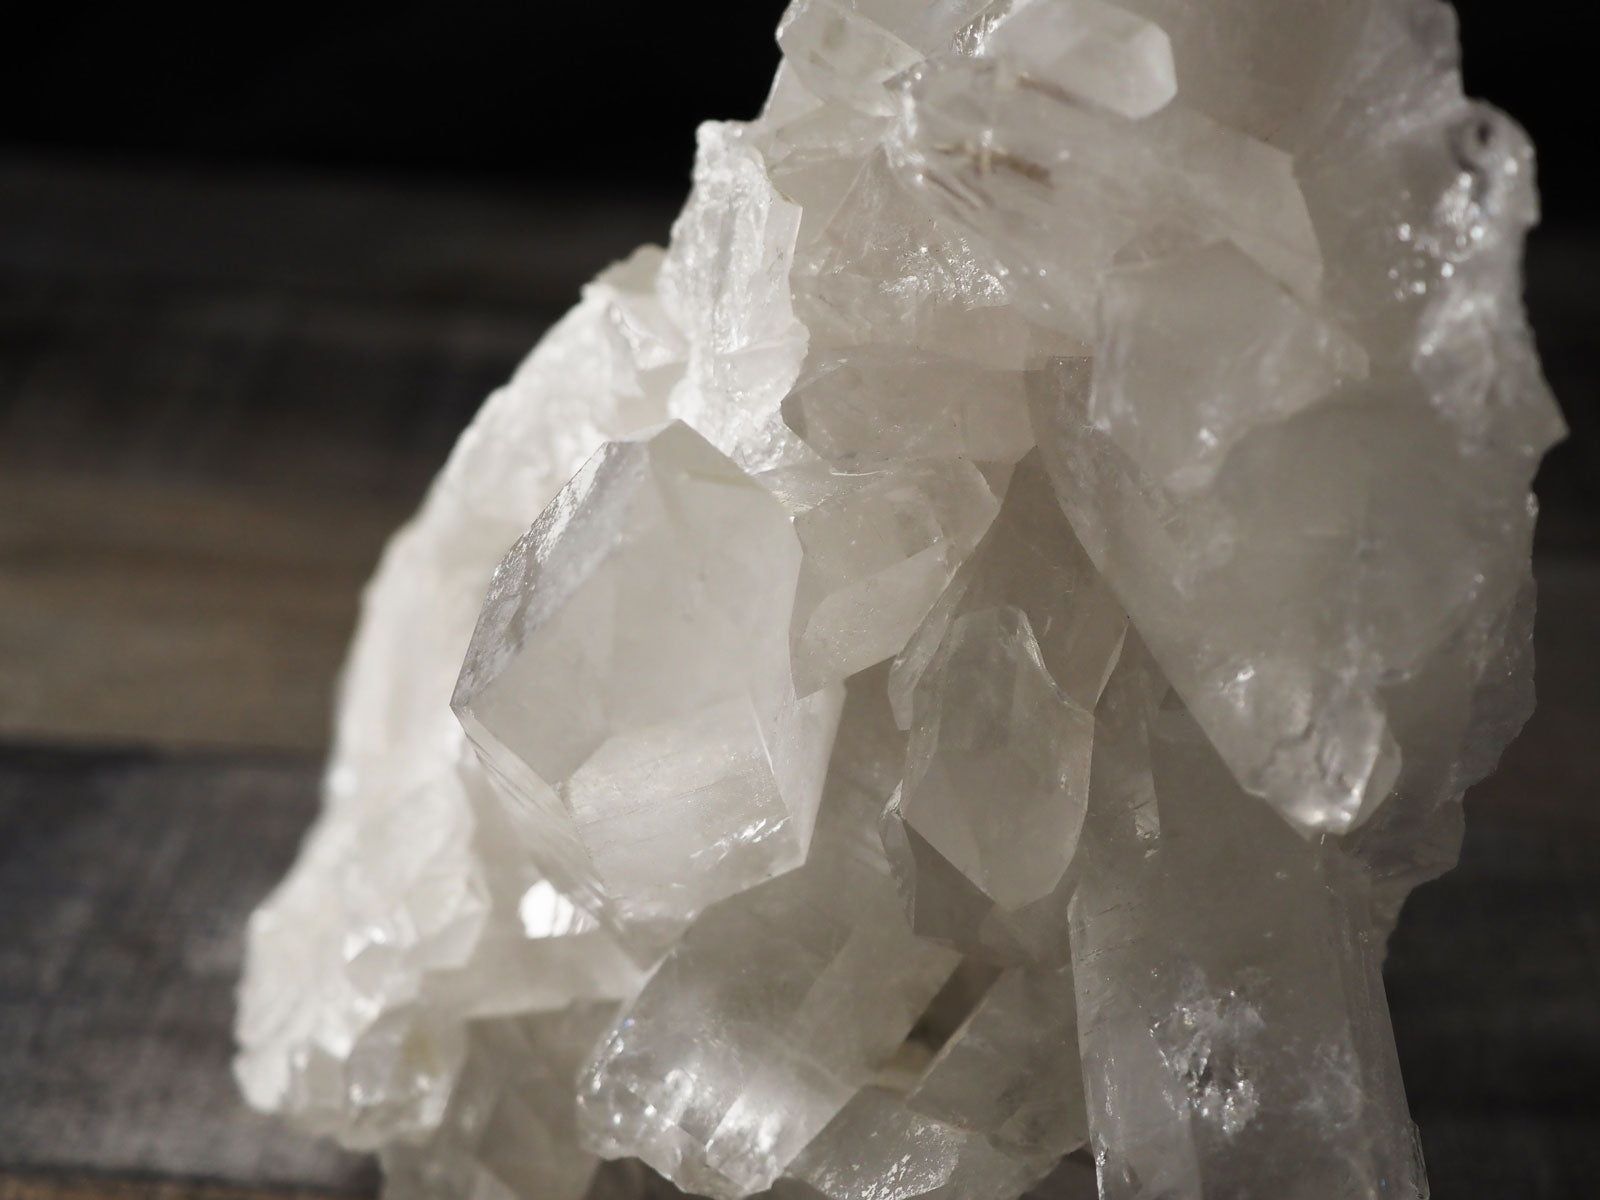 Extra large, stunning Brazilian quartz cluster that is 7.5" wide and 7.5" tall, weighing just over 5 lb. - Closeup